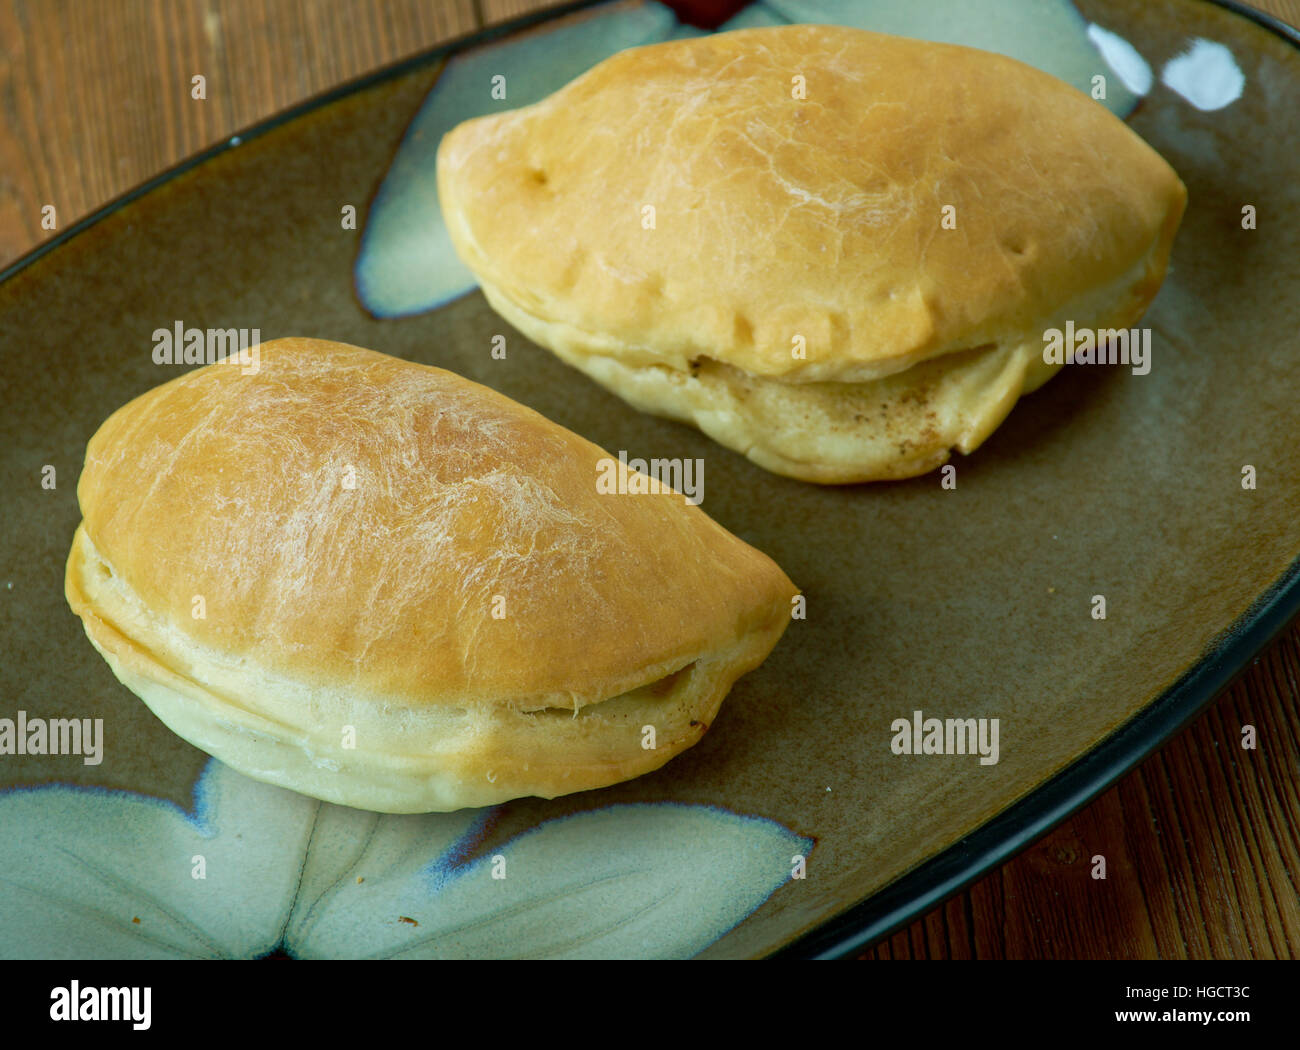 Panada stuffed bread or pastry baked or fried in many countries in Spain and Latin America Stock Photo